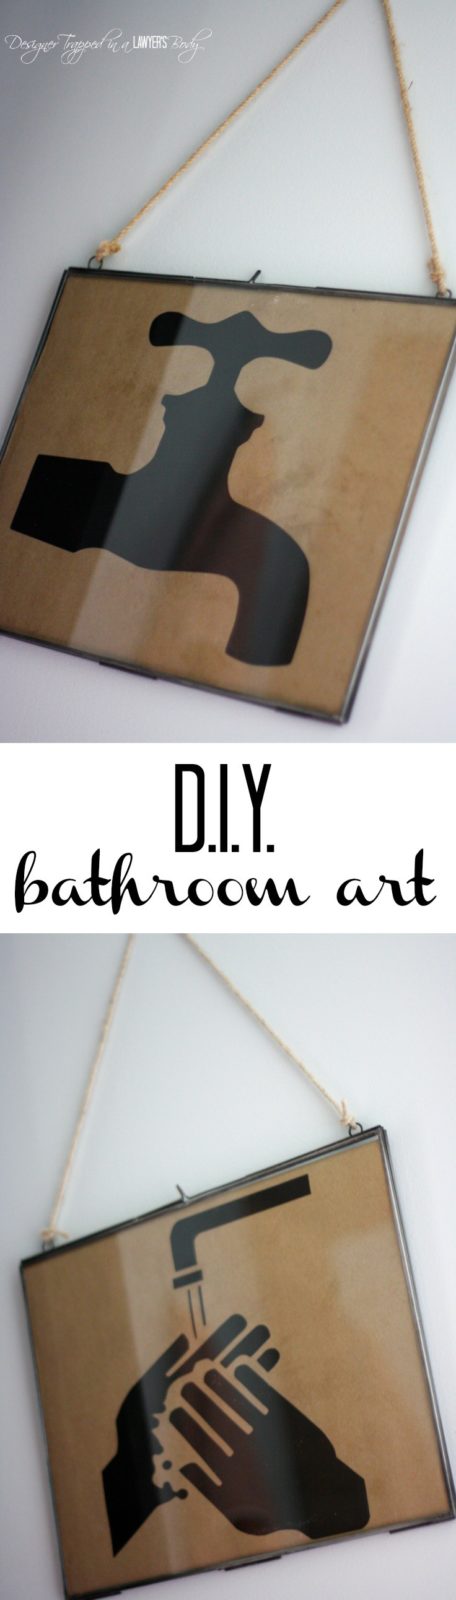 FABULOUS! Love this DIY bathroom decor! Full tutorial by Designer Trapped in a Lawyer's Body! #BathroomArt